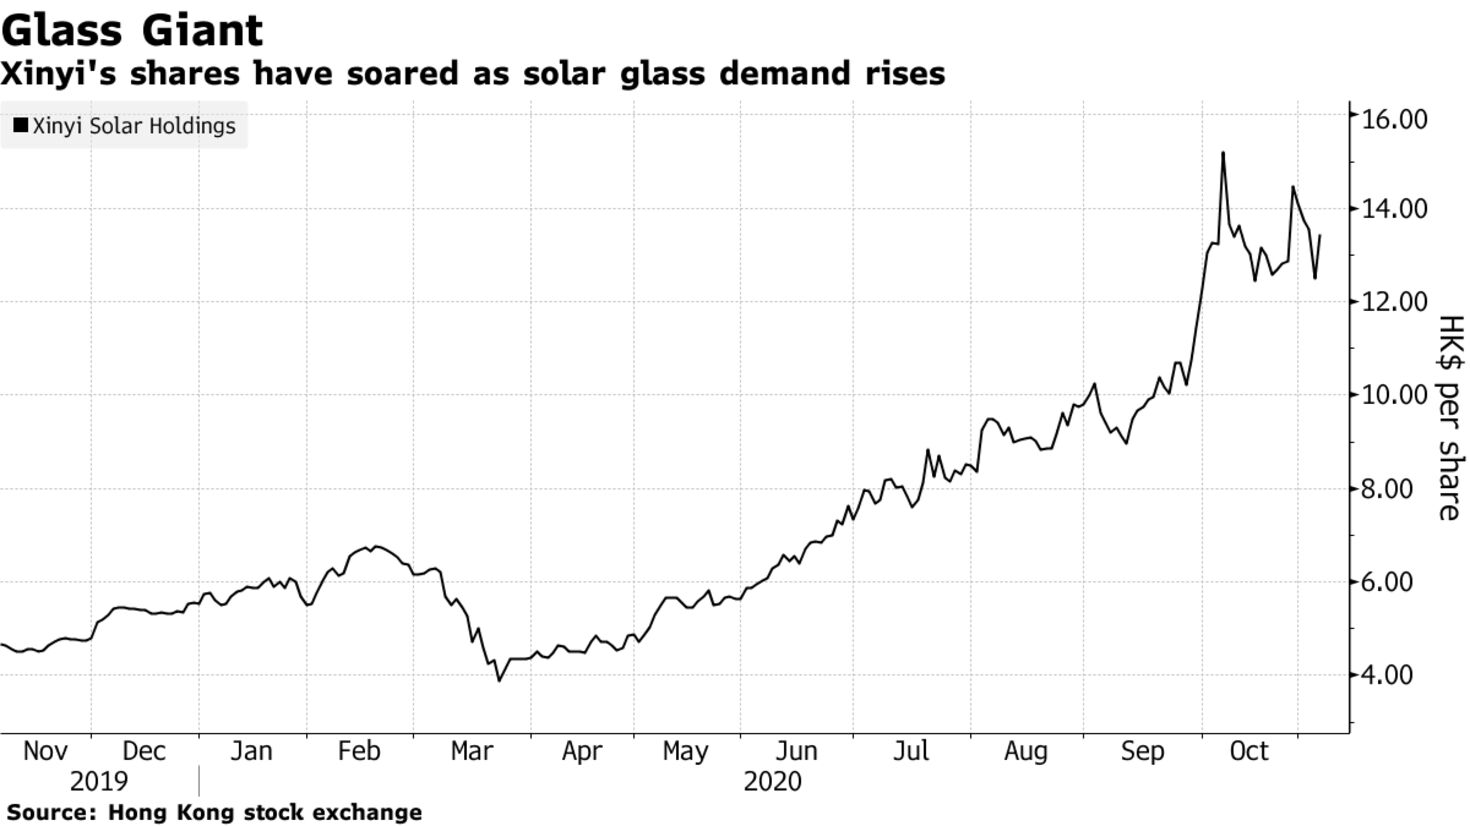 Xinyi's shares have soared as solar glass demand rises